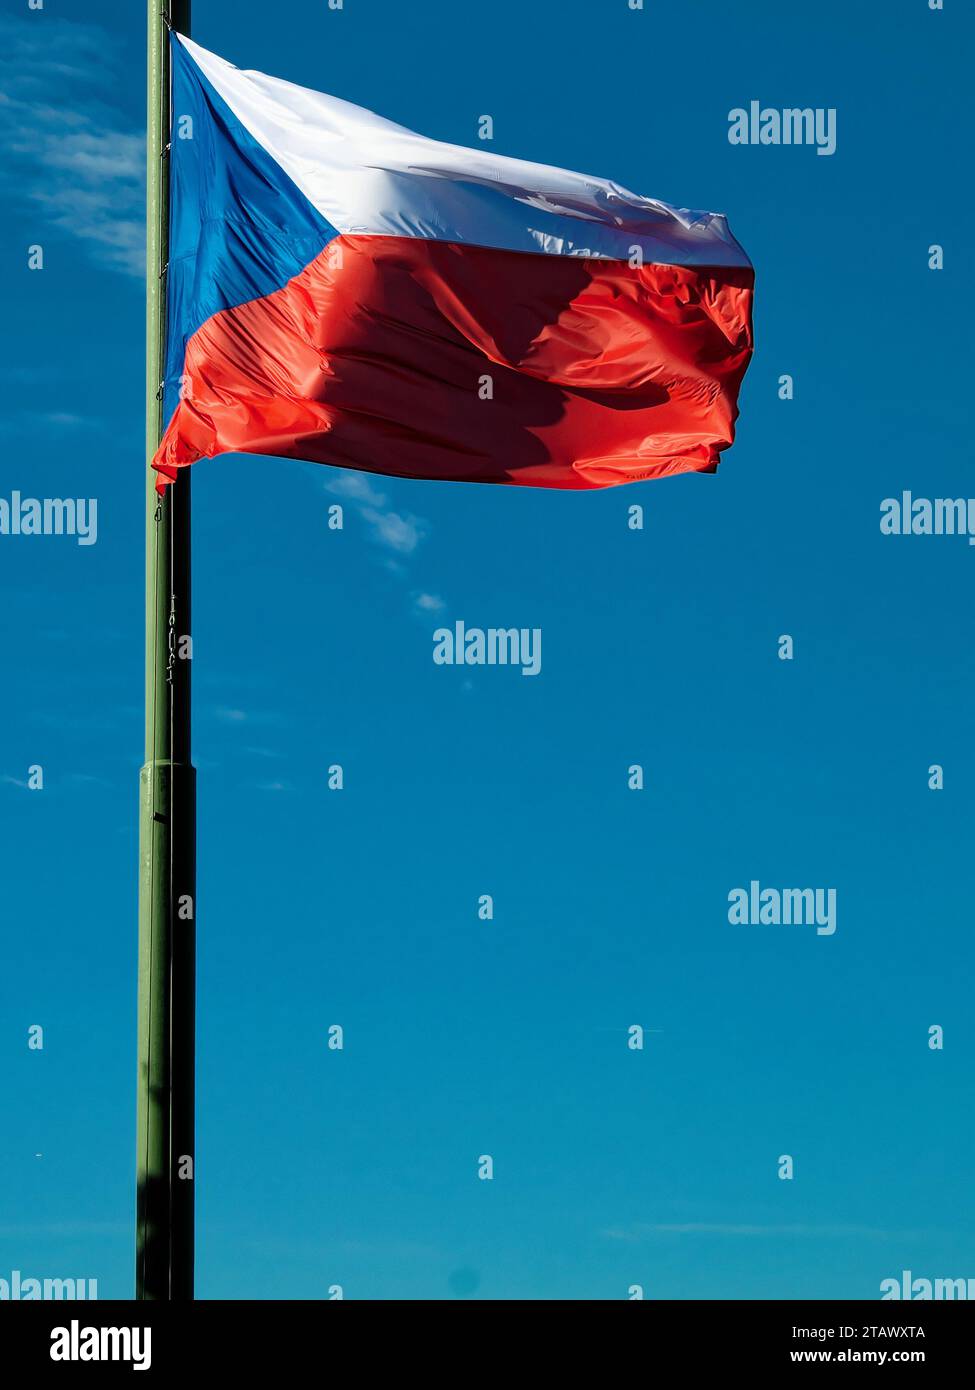 The Czech Republic flag is waving in the wind on a flagpole with a clear blue sky in the background. Stock Photo